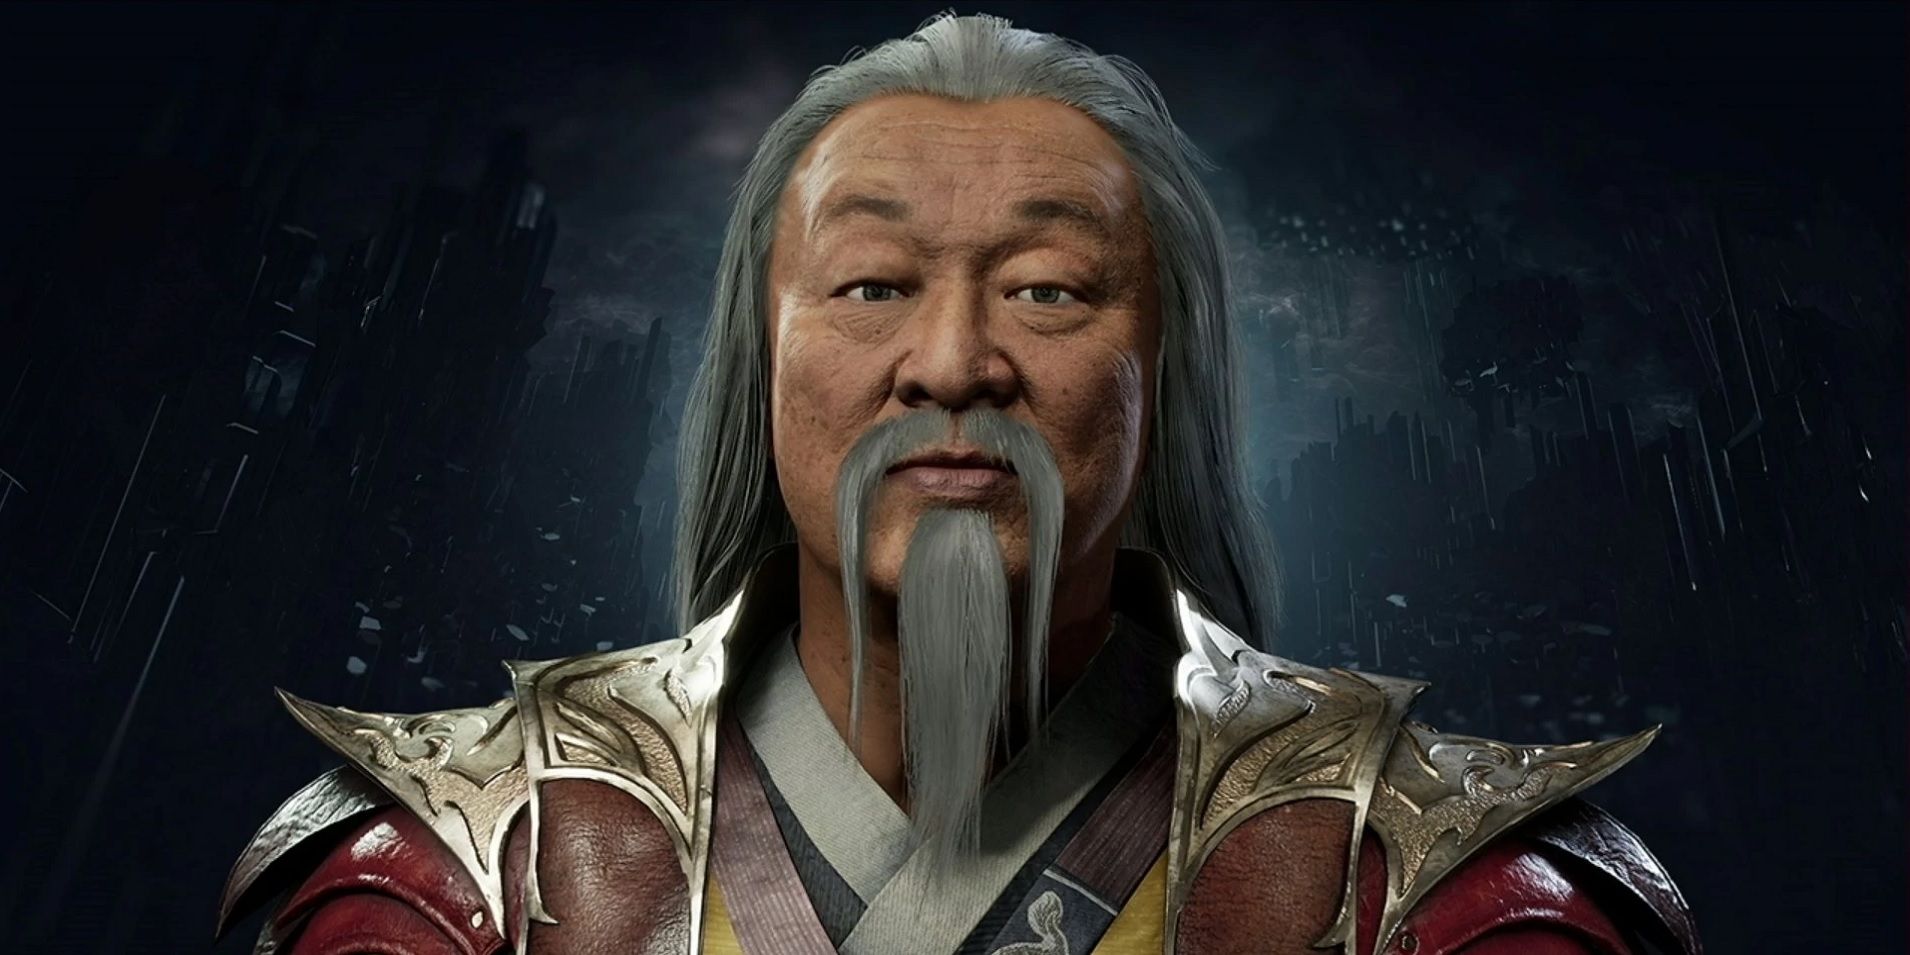 Why Shang Tsung is Mortal Kombat's greatest villain despite holding tons of  L's